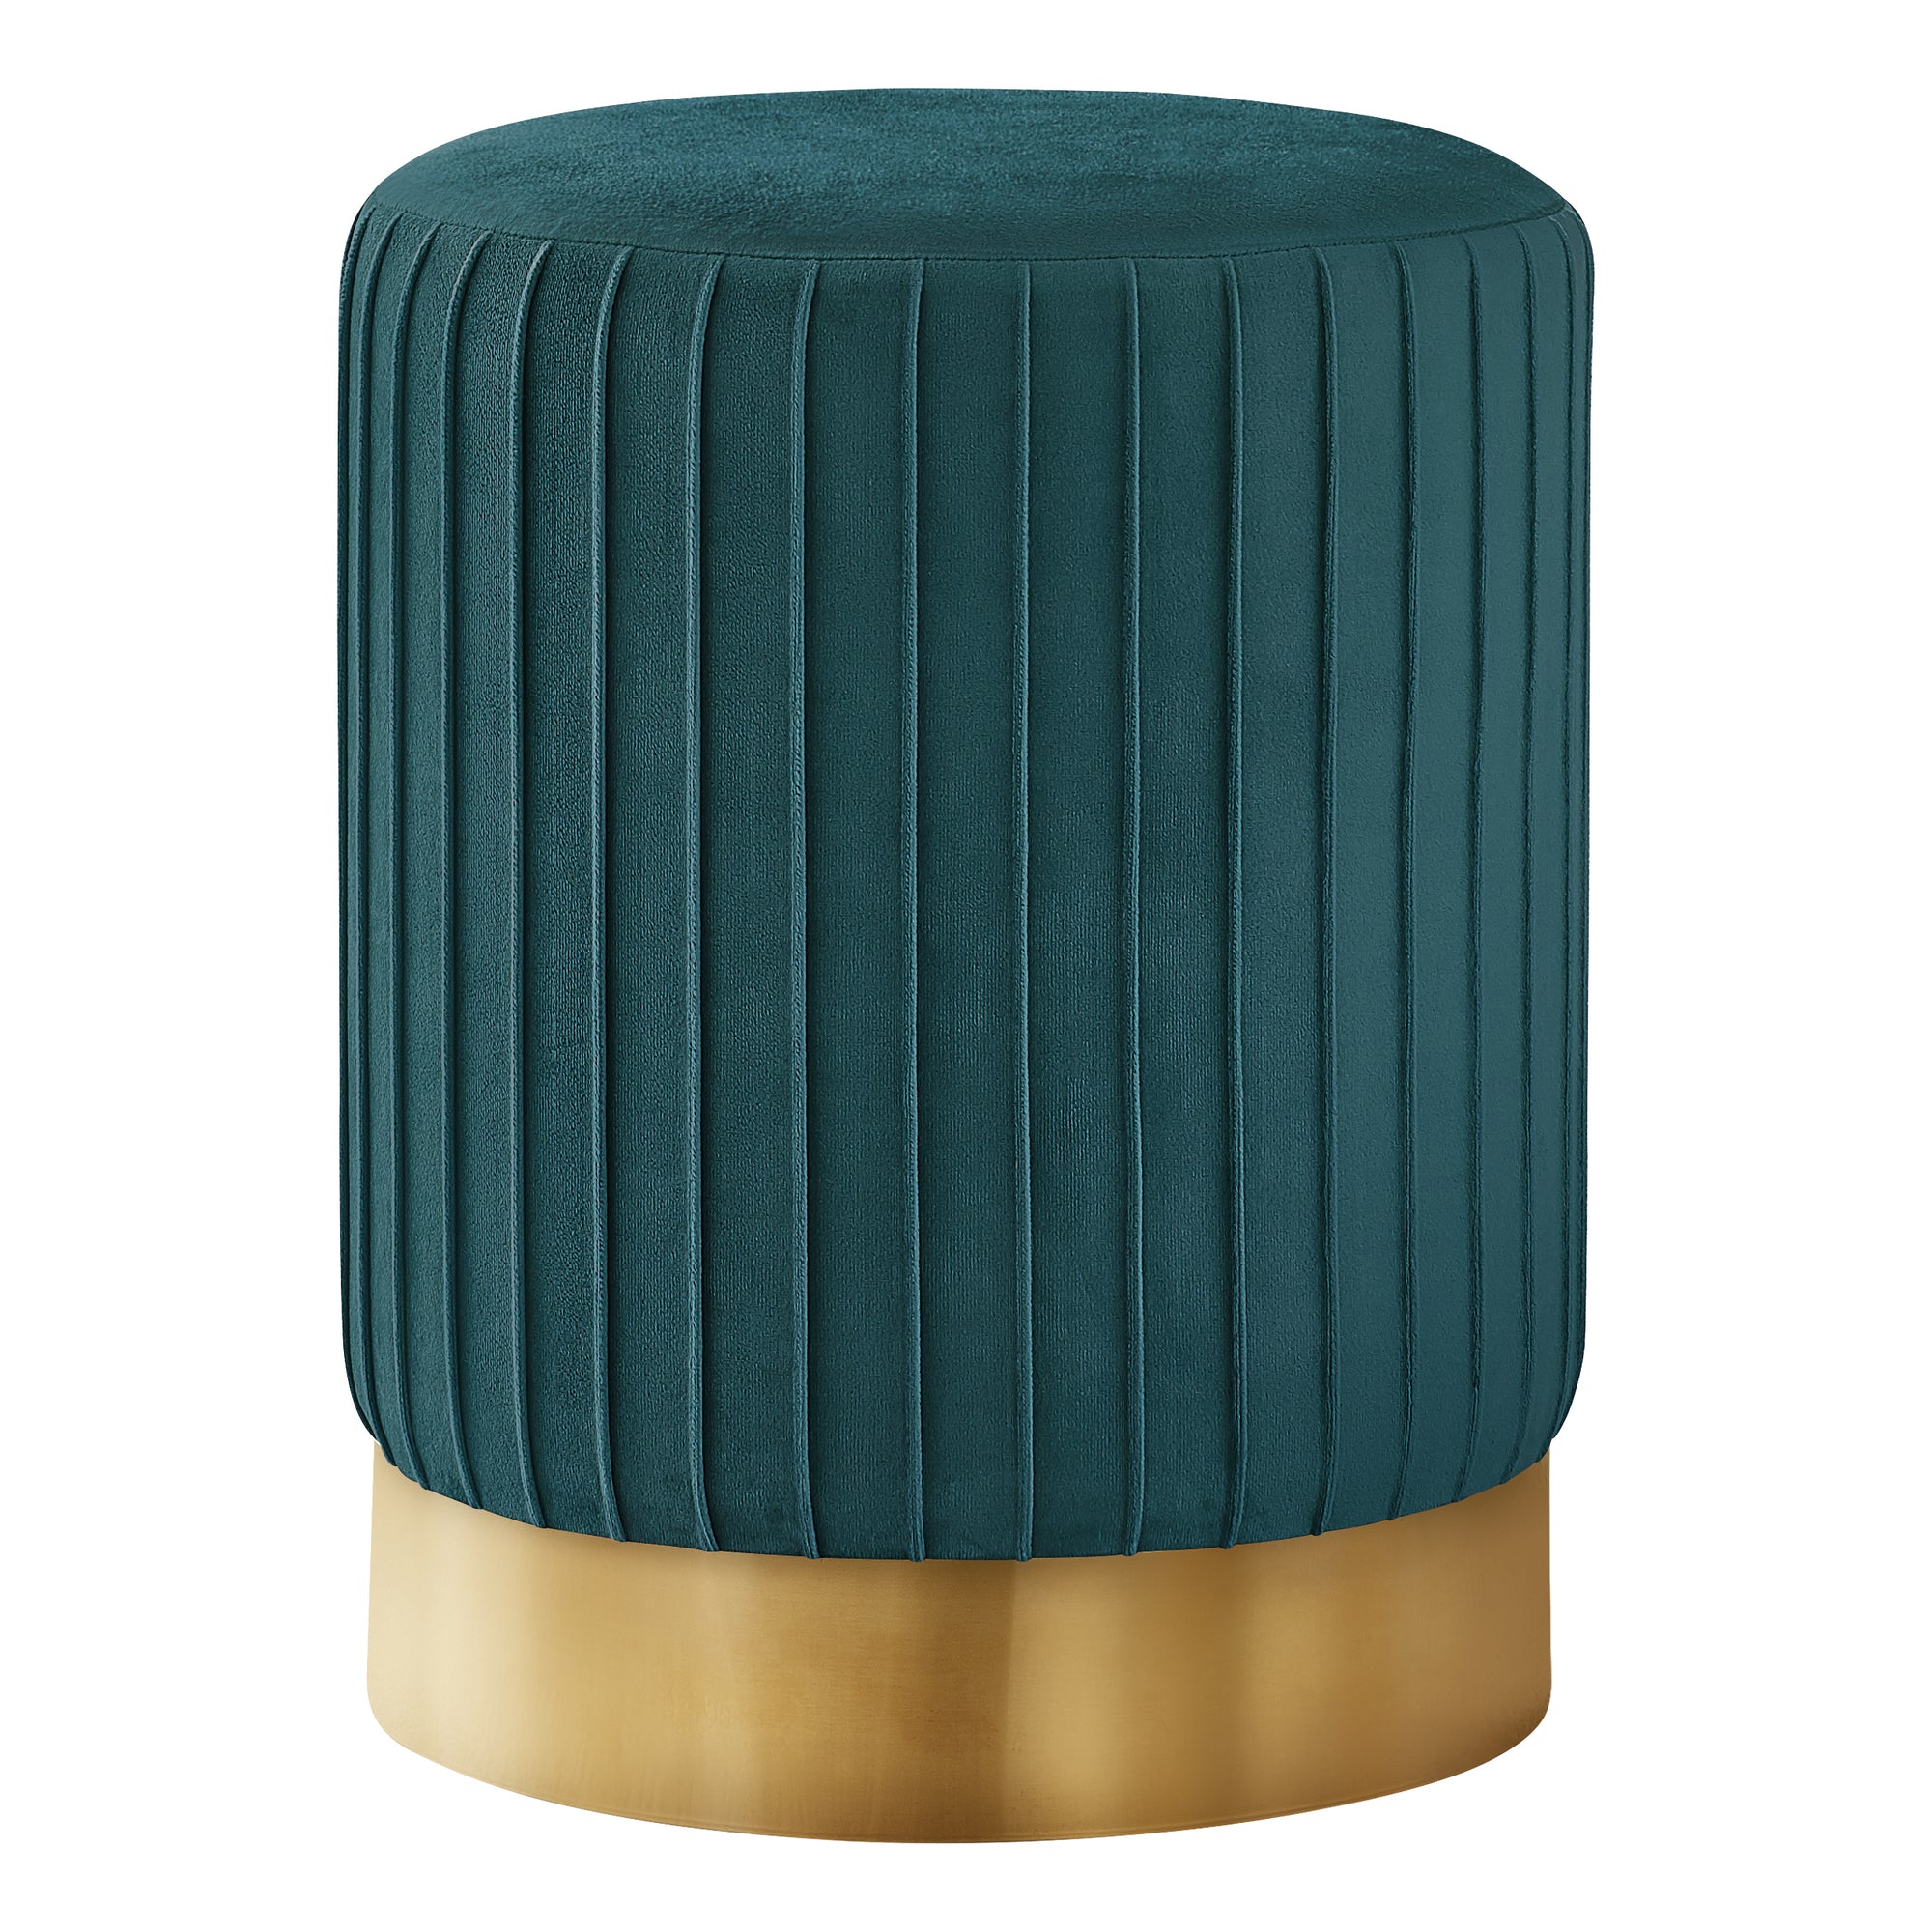 MN-309019    Ottoman, Pouf, Footrest, Foot Stool, 14" Round, Velvet Fabric, Metal Base, Turquoise, Gold, Contemporary, Glam, Modern